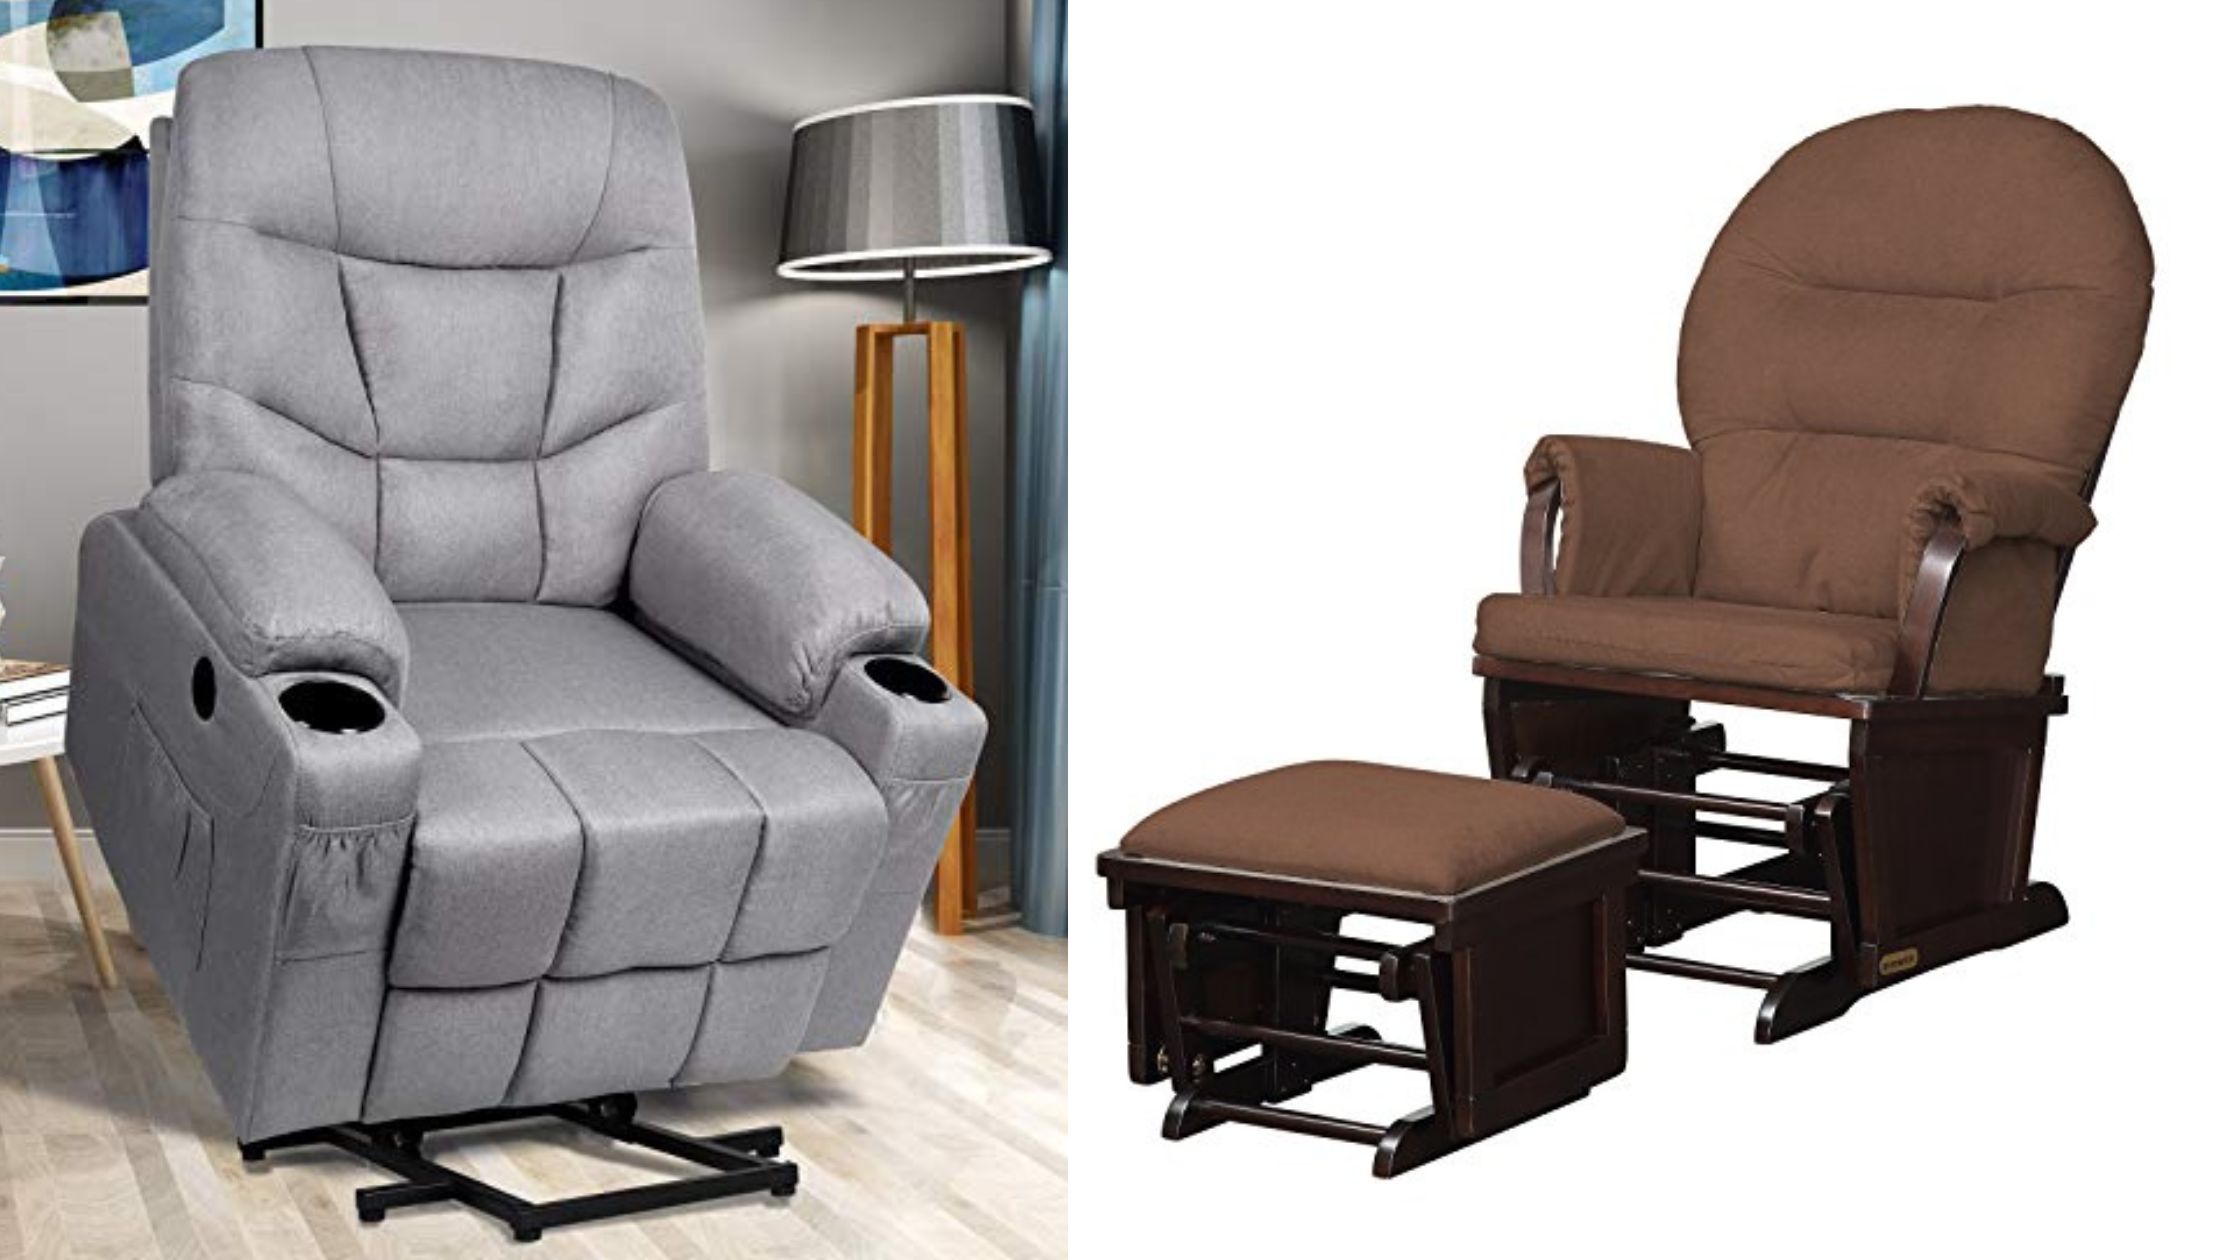 Difference Between a Glider and a Recliner